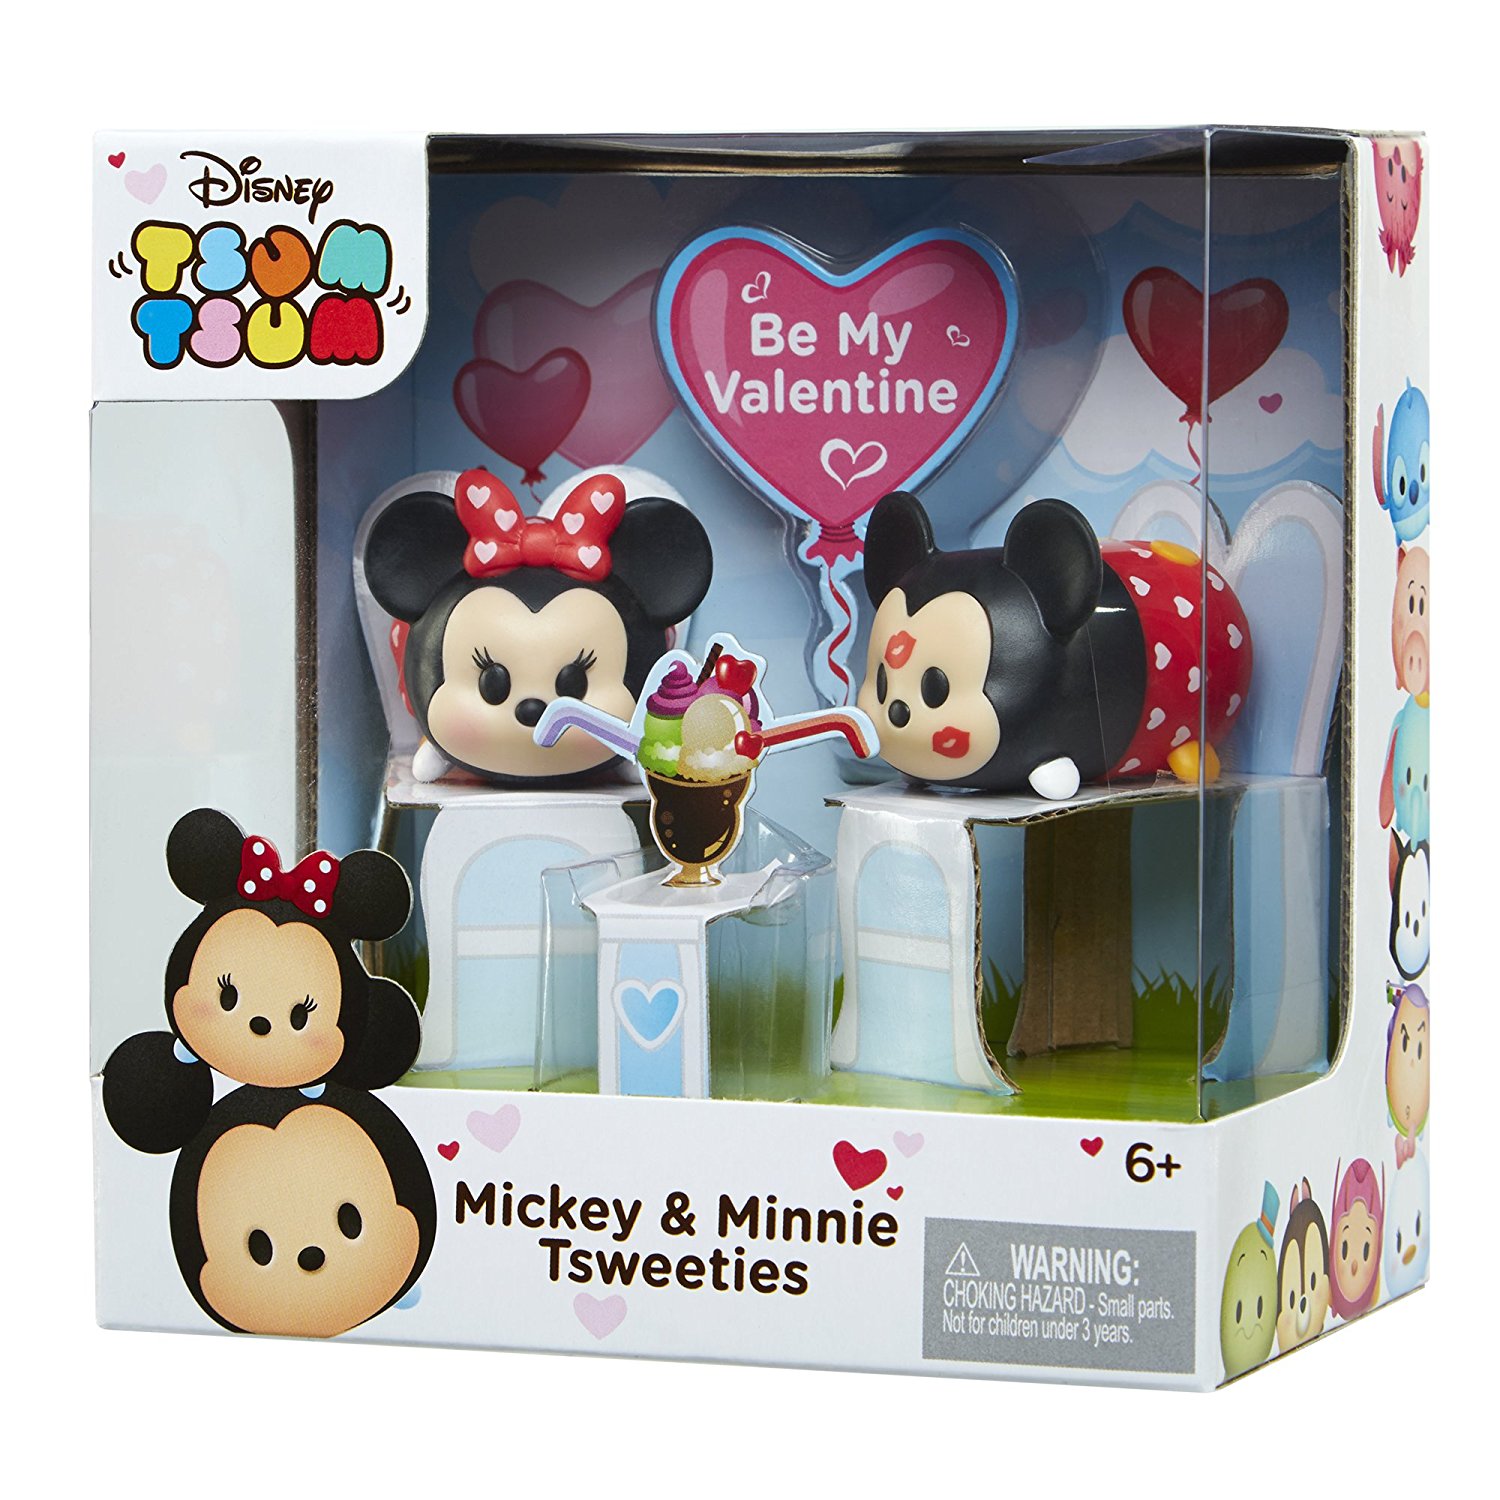 Adorable Mickey & Minnie Tsum Tsum Tsweeties for Valentine’s Day